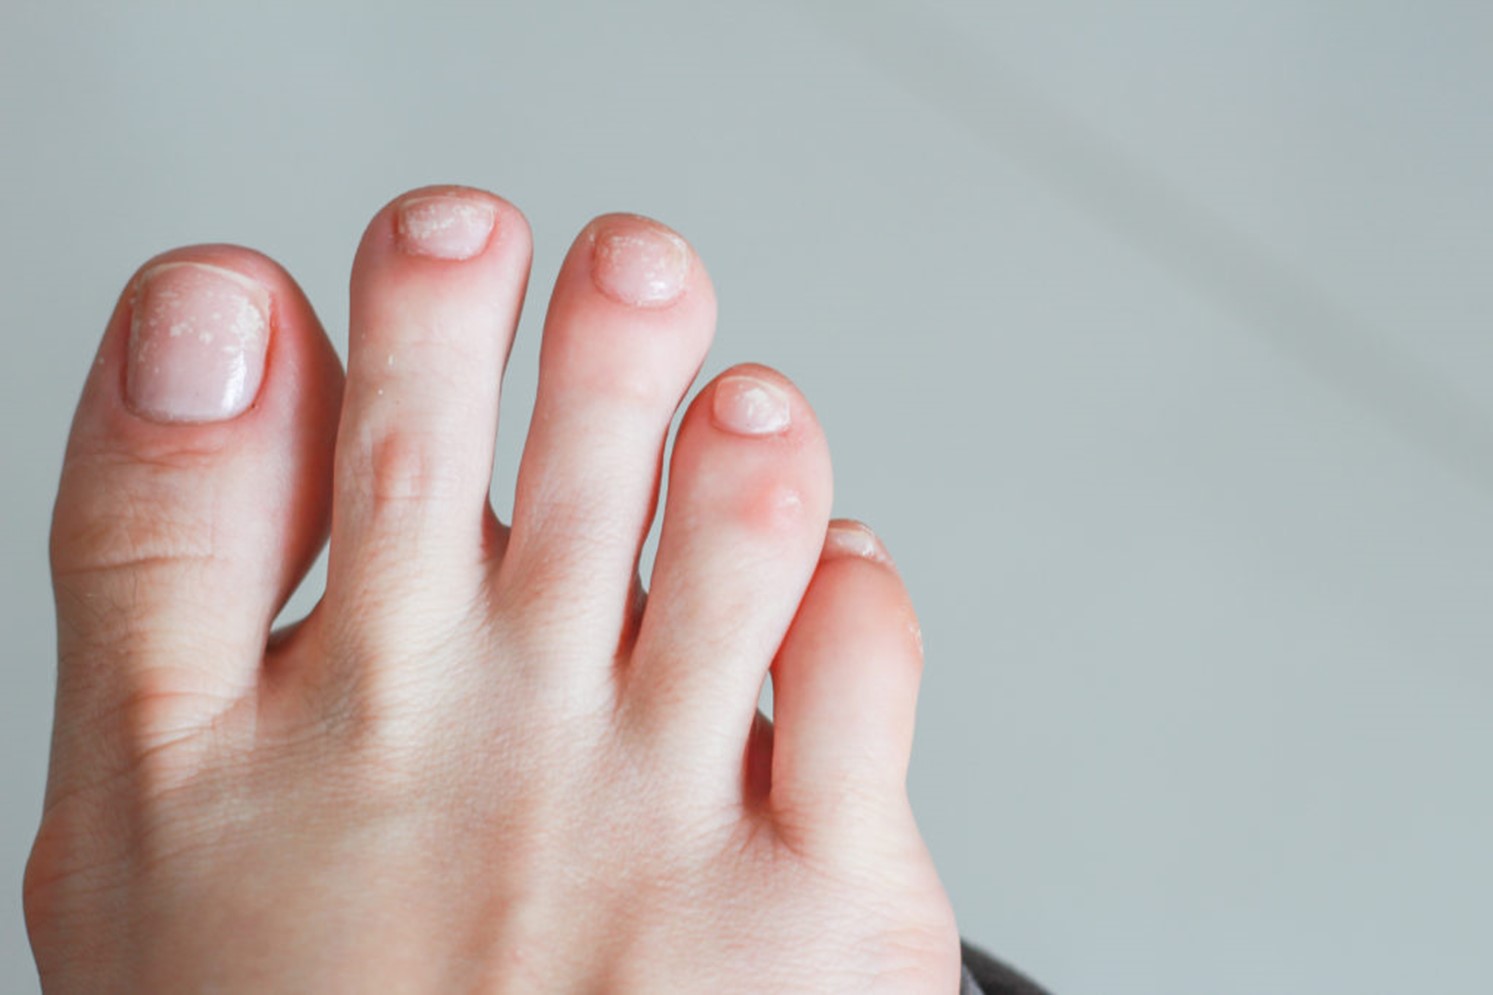 Are The White Spots On Your Nails Bothering You?